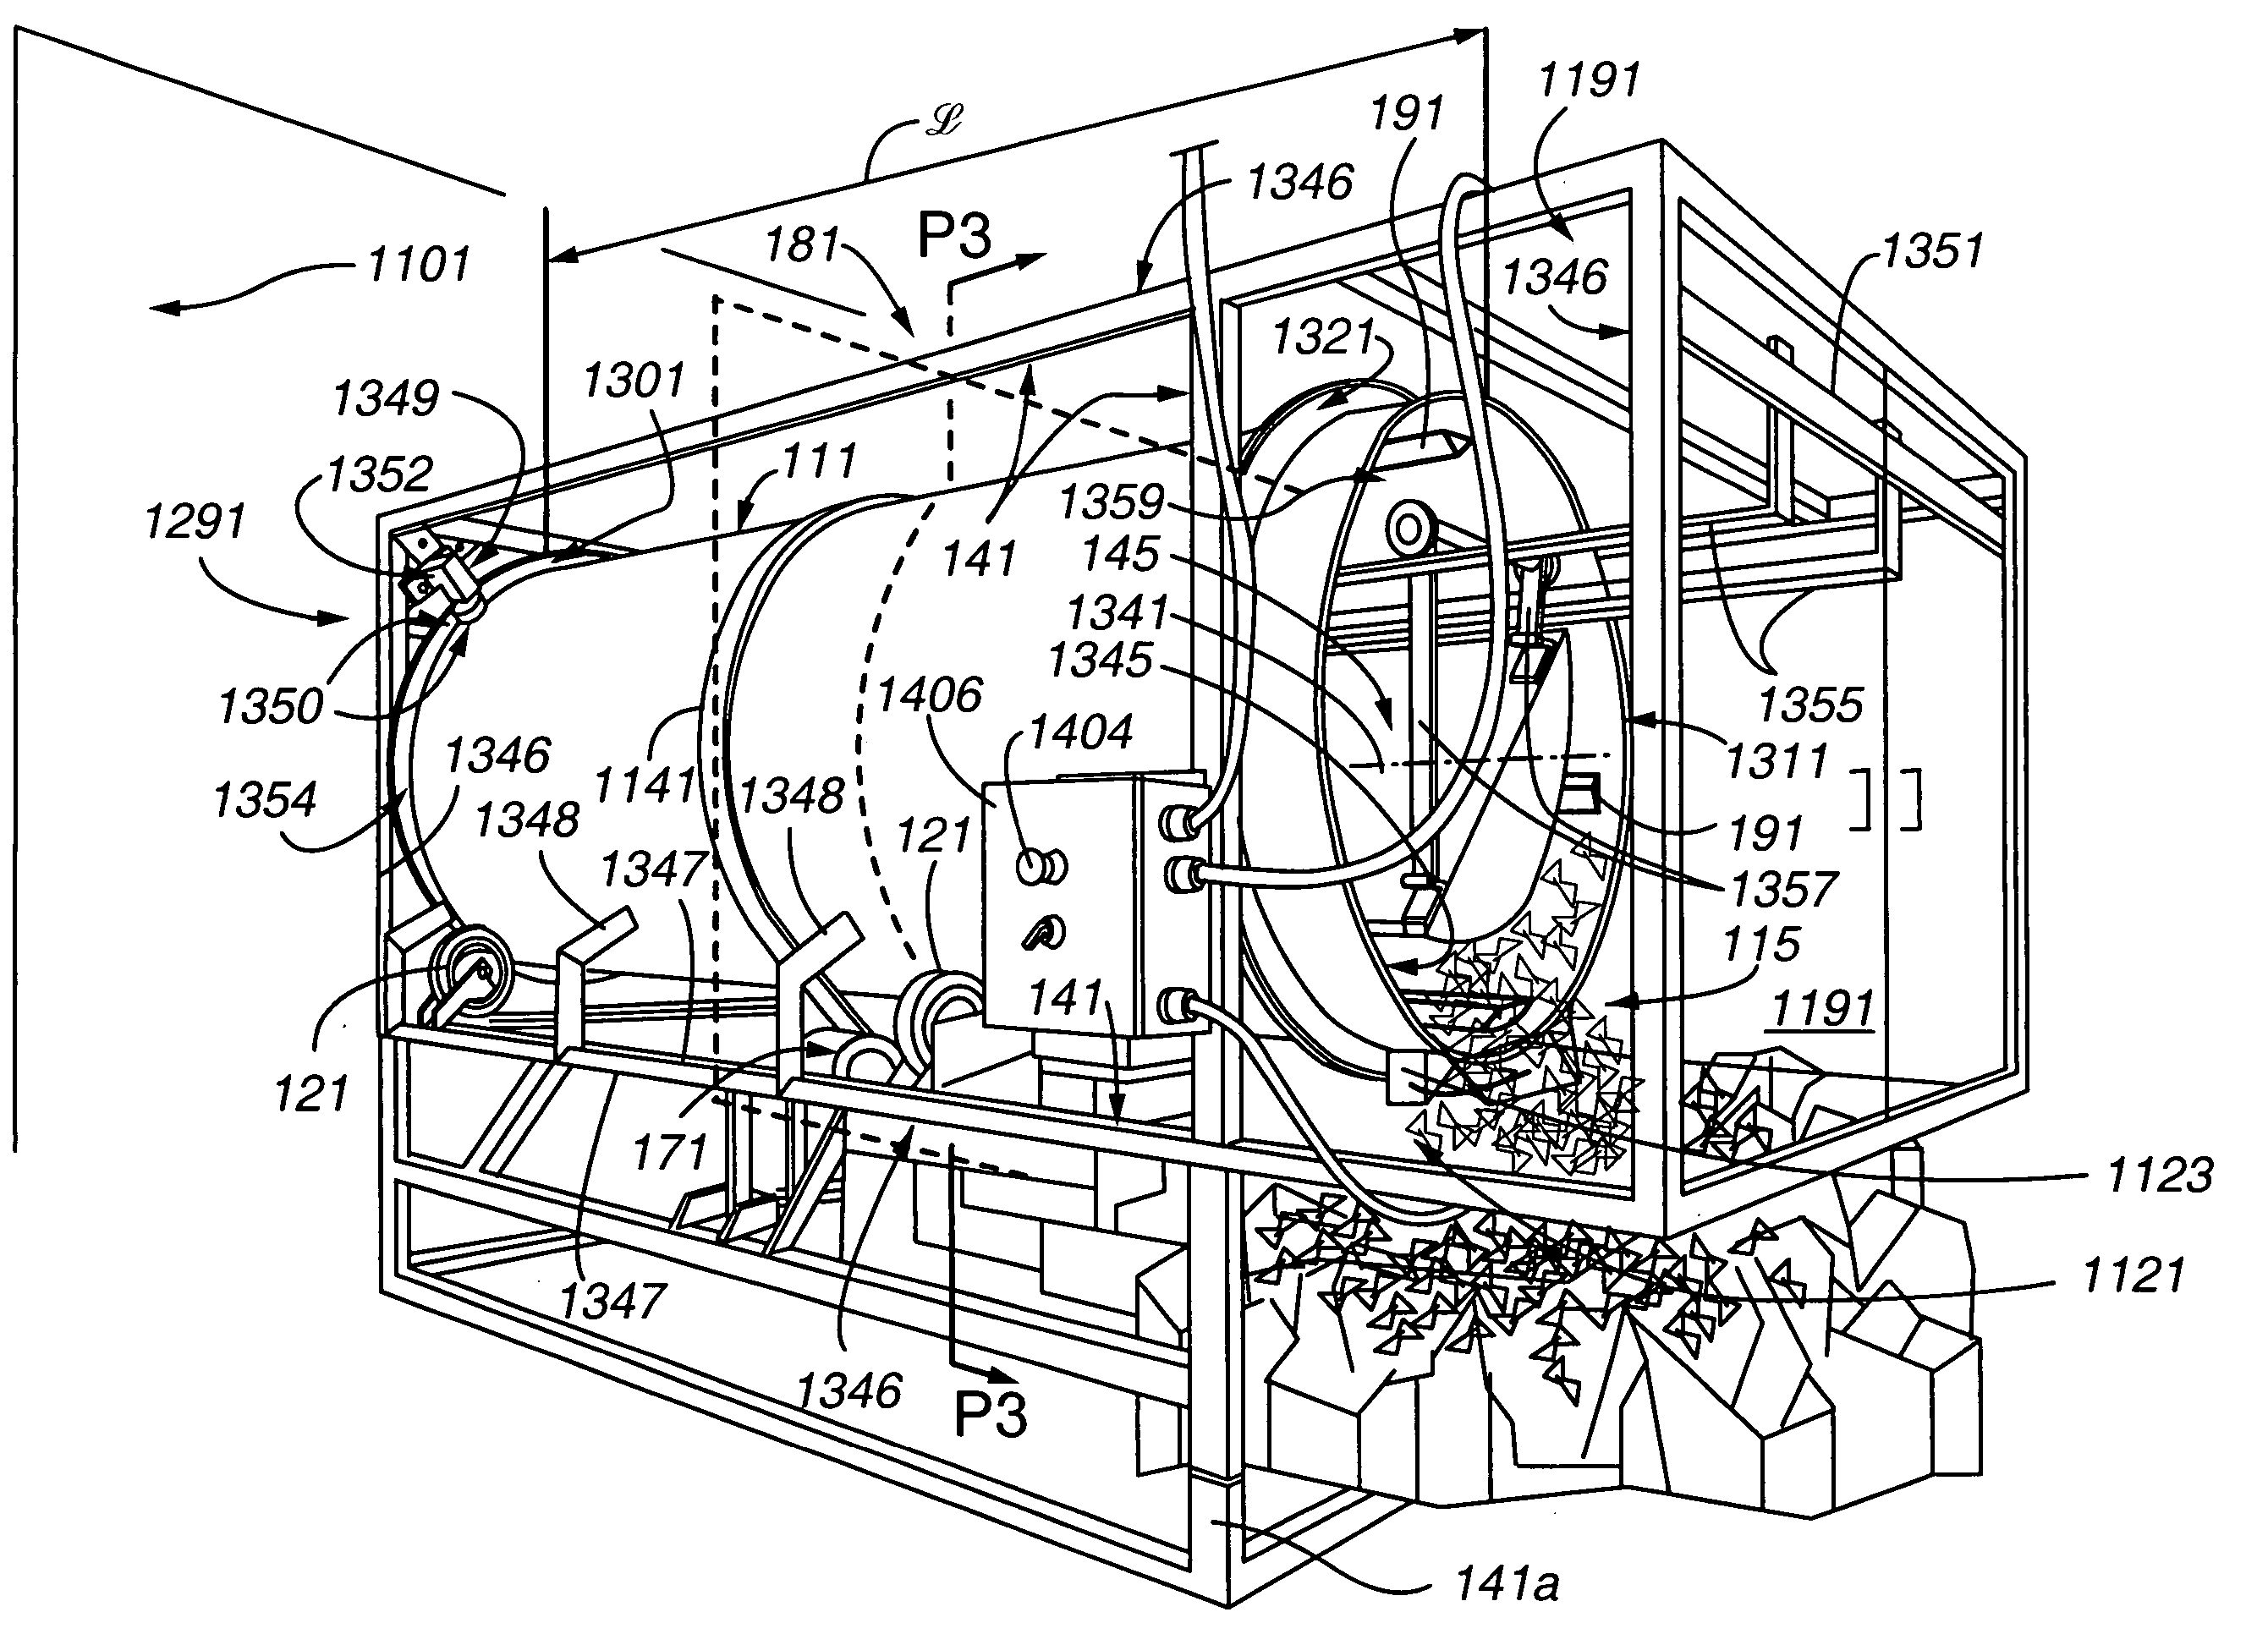 Food product surface sterilization apparatus and method